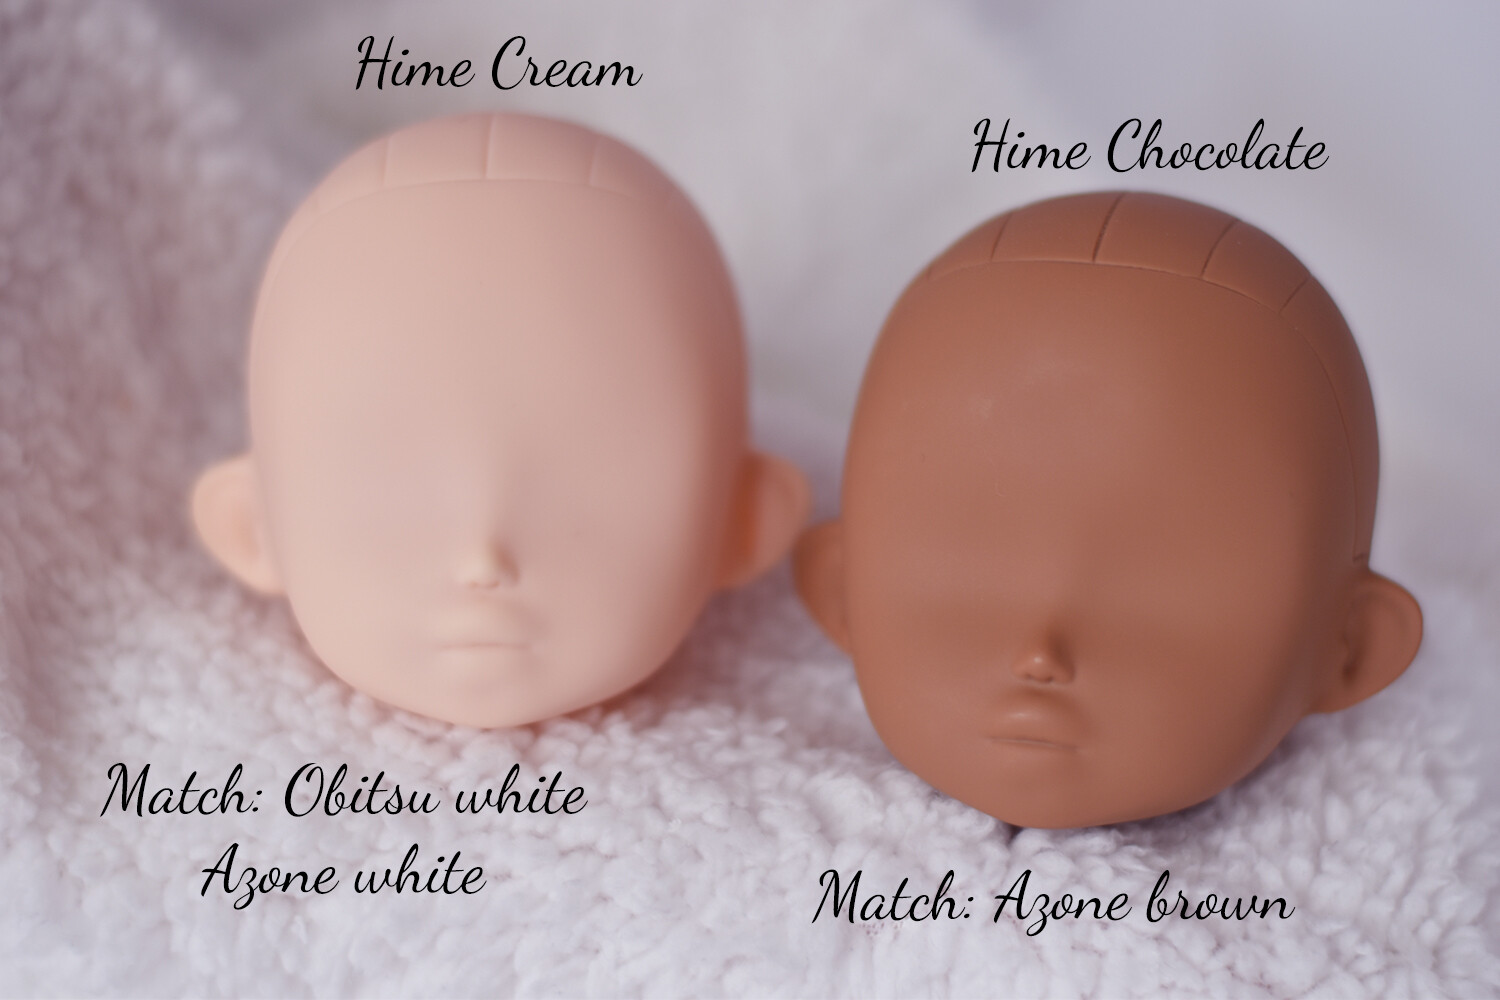 Hime Blank vinyl head for DIY - Color Options: Cream or Chocolate